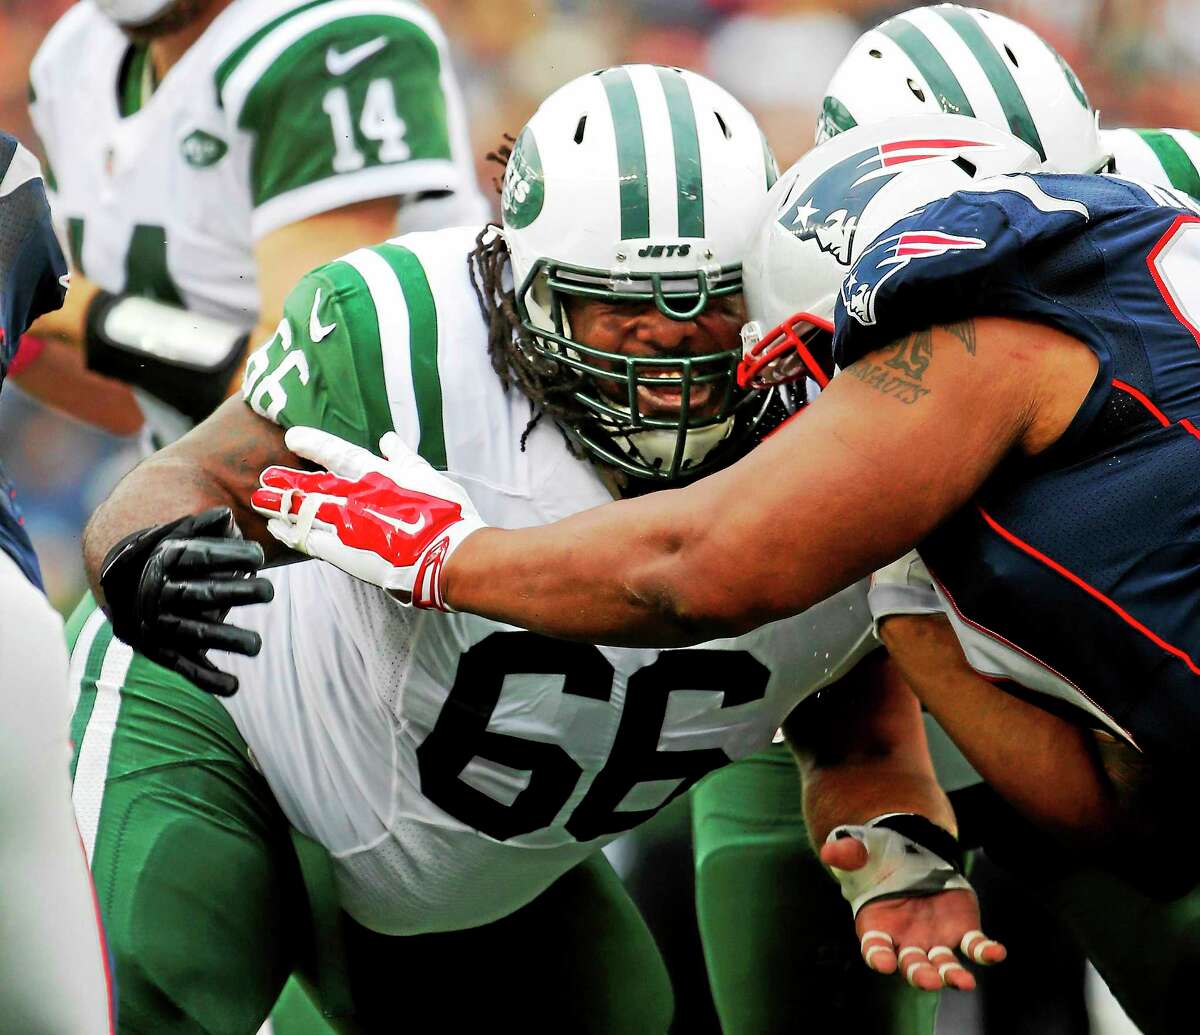 New York Jets guard Willie Colon blocks against the New England Patriots during an Oct. 25 game at Gillette Stadium in Foxborough, Mass.